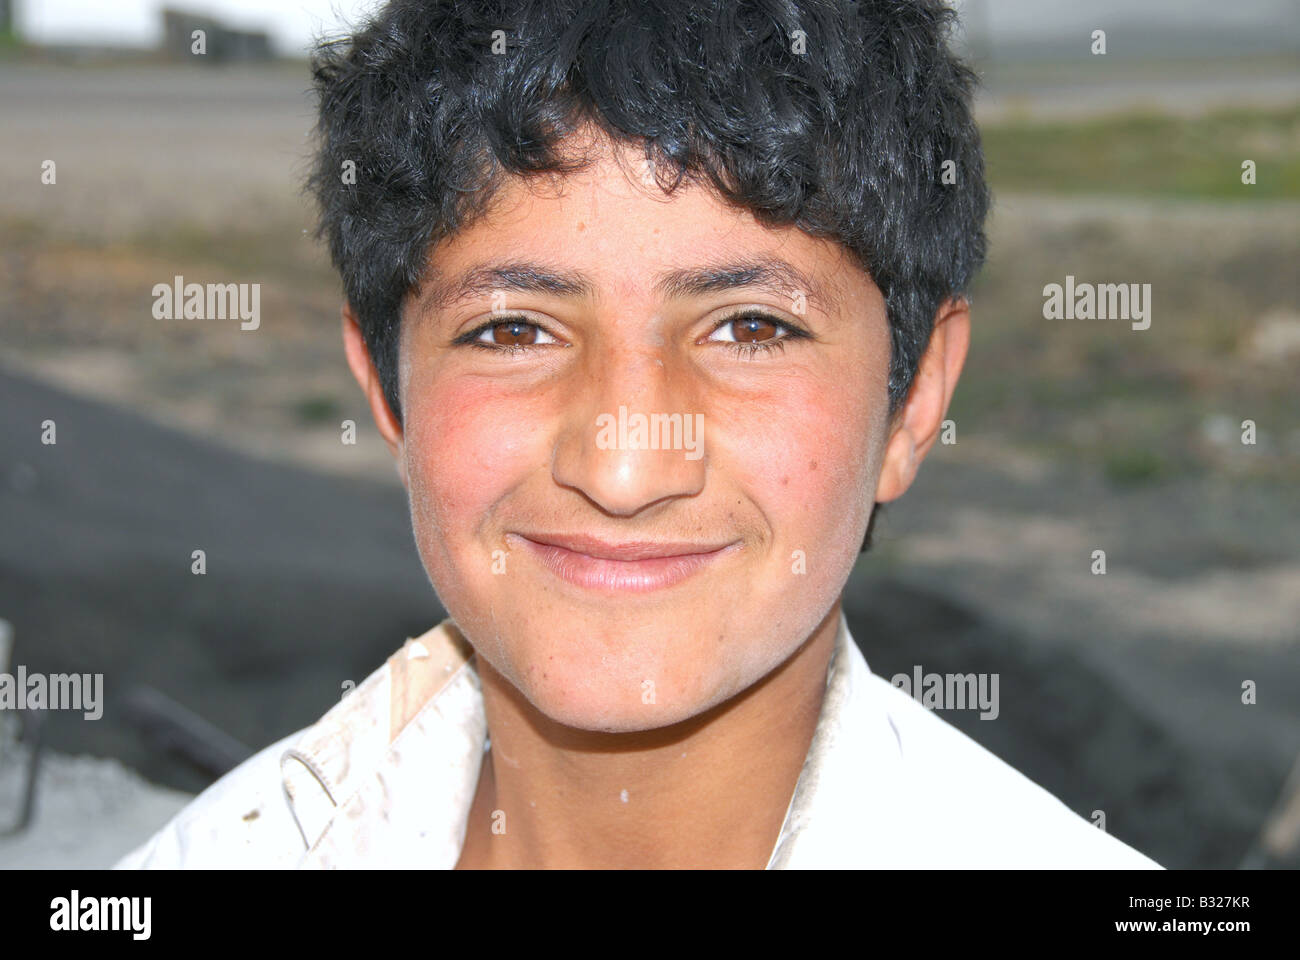 young-turkish-boy-with-a-dusty-face-B327KR.jpg